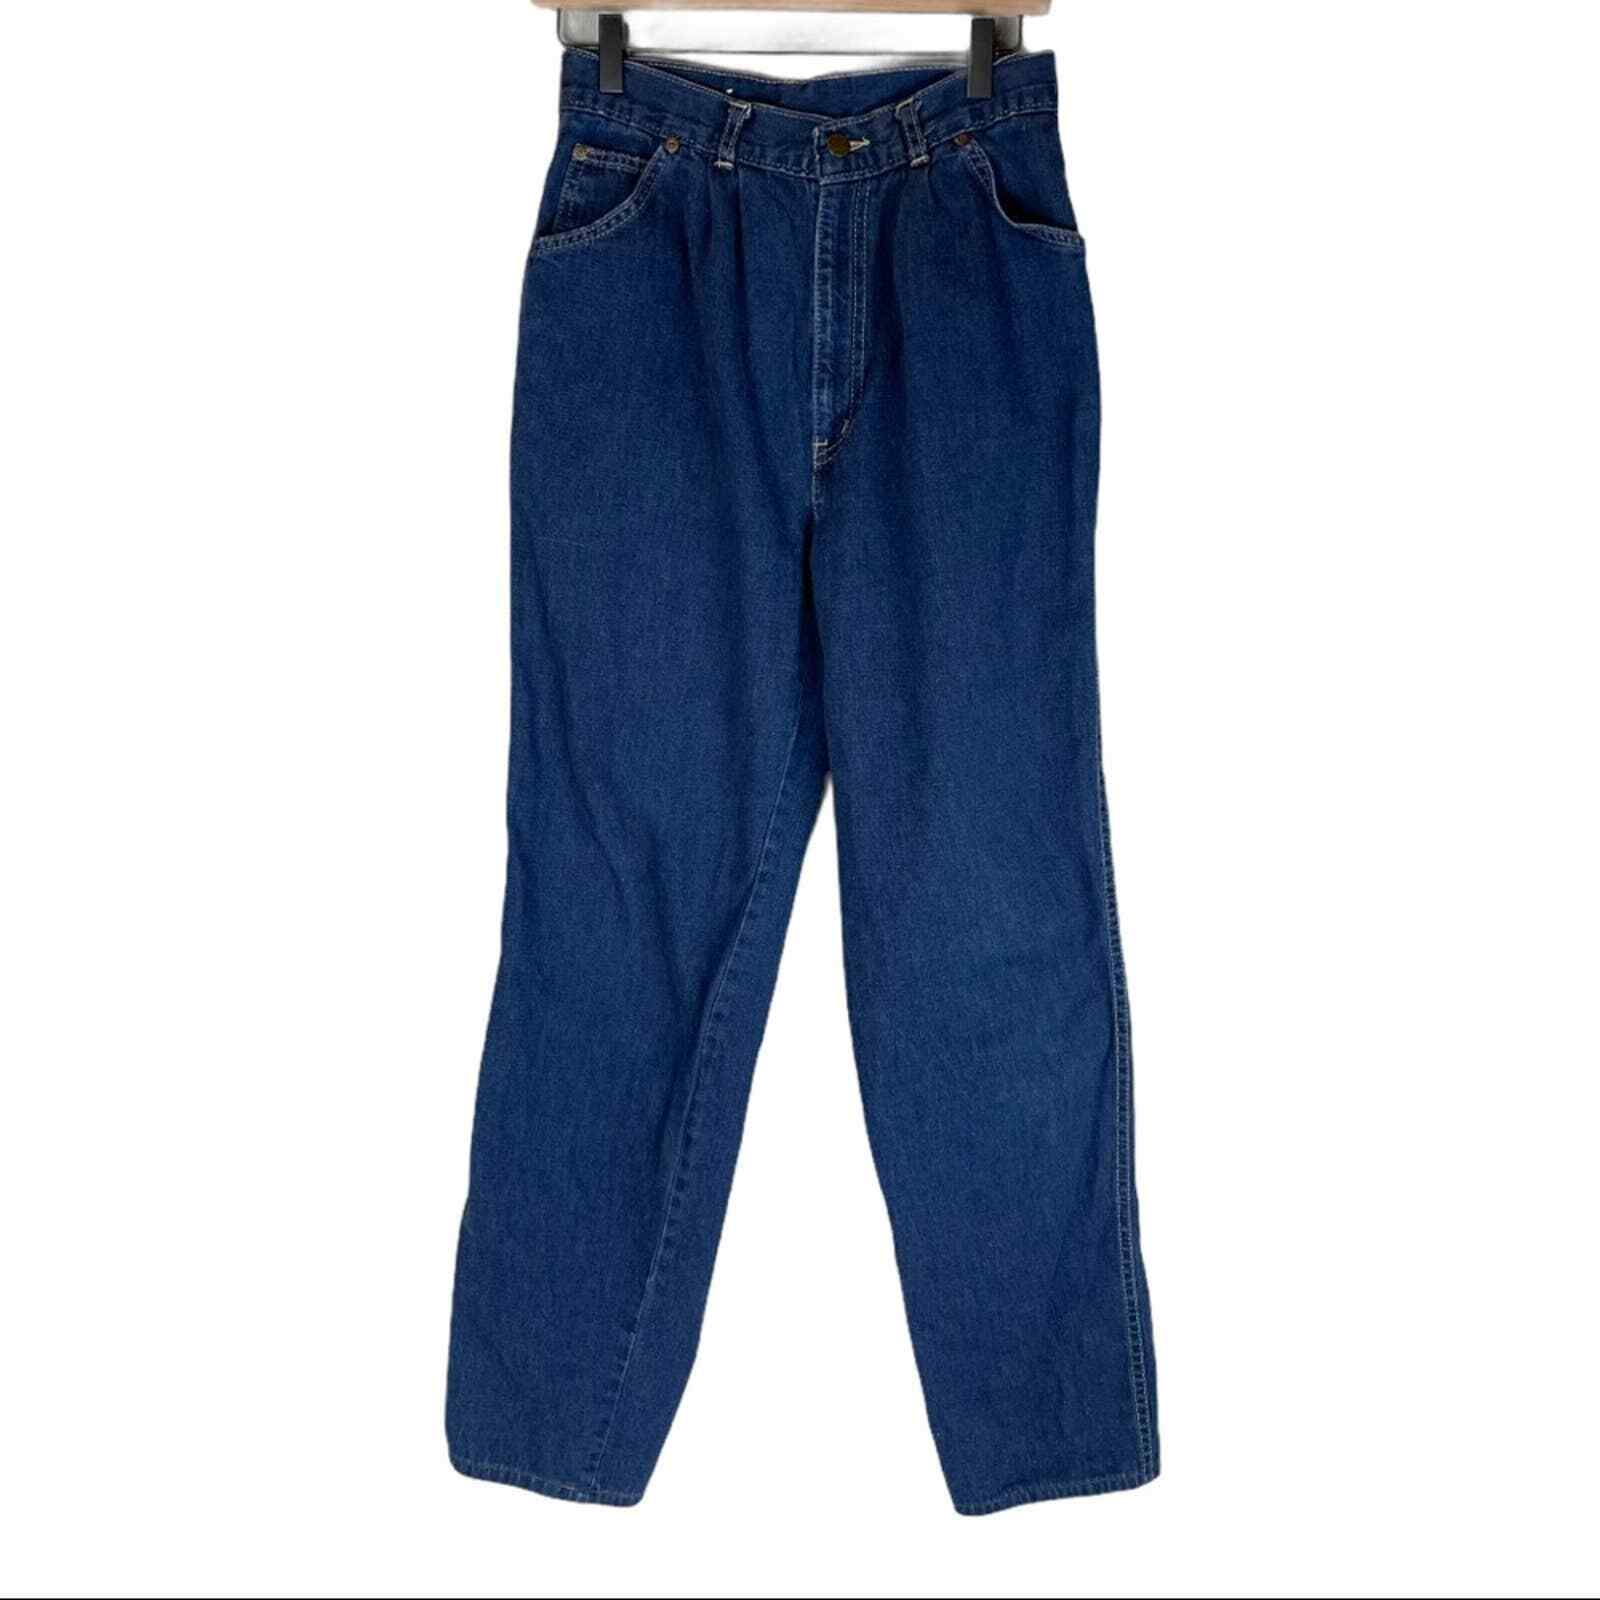 Vintage Chic pleated tapered high rise relaxed fit mom jeans